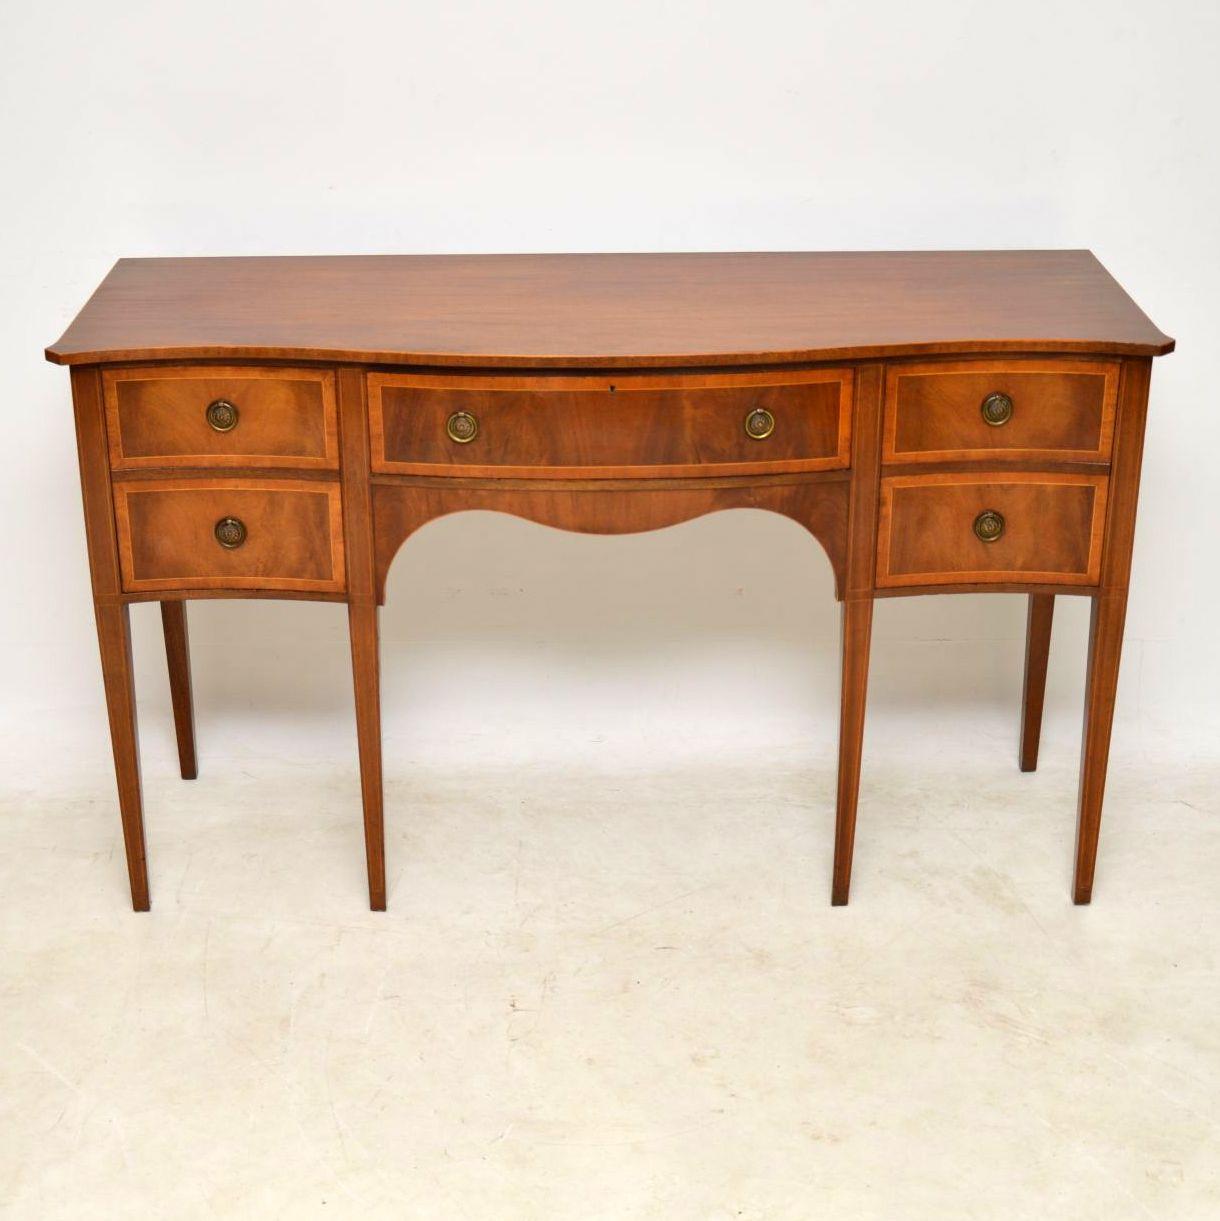 Antique Sheraton style mahogany sideboard in excellent condition & dating from circa 1950s period. It has a serpentine shaped front with dummy drawers on either side that are really cupboards & a proper drawer in the middle. There’s fine satinwood